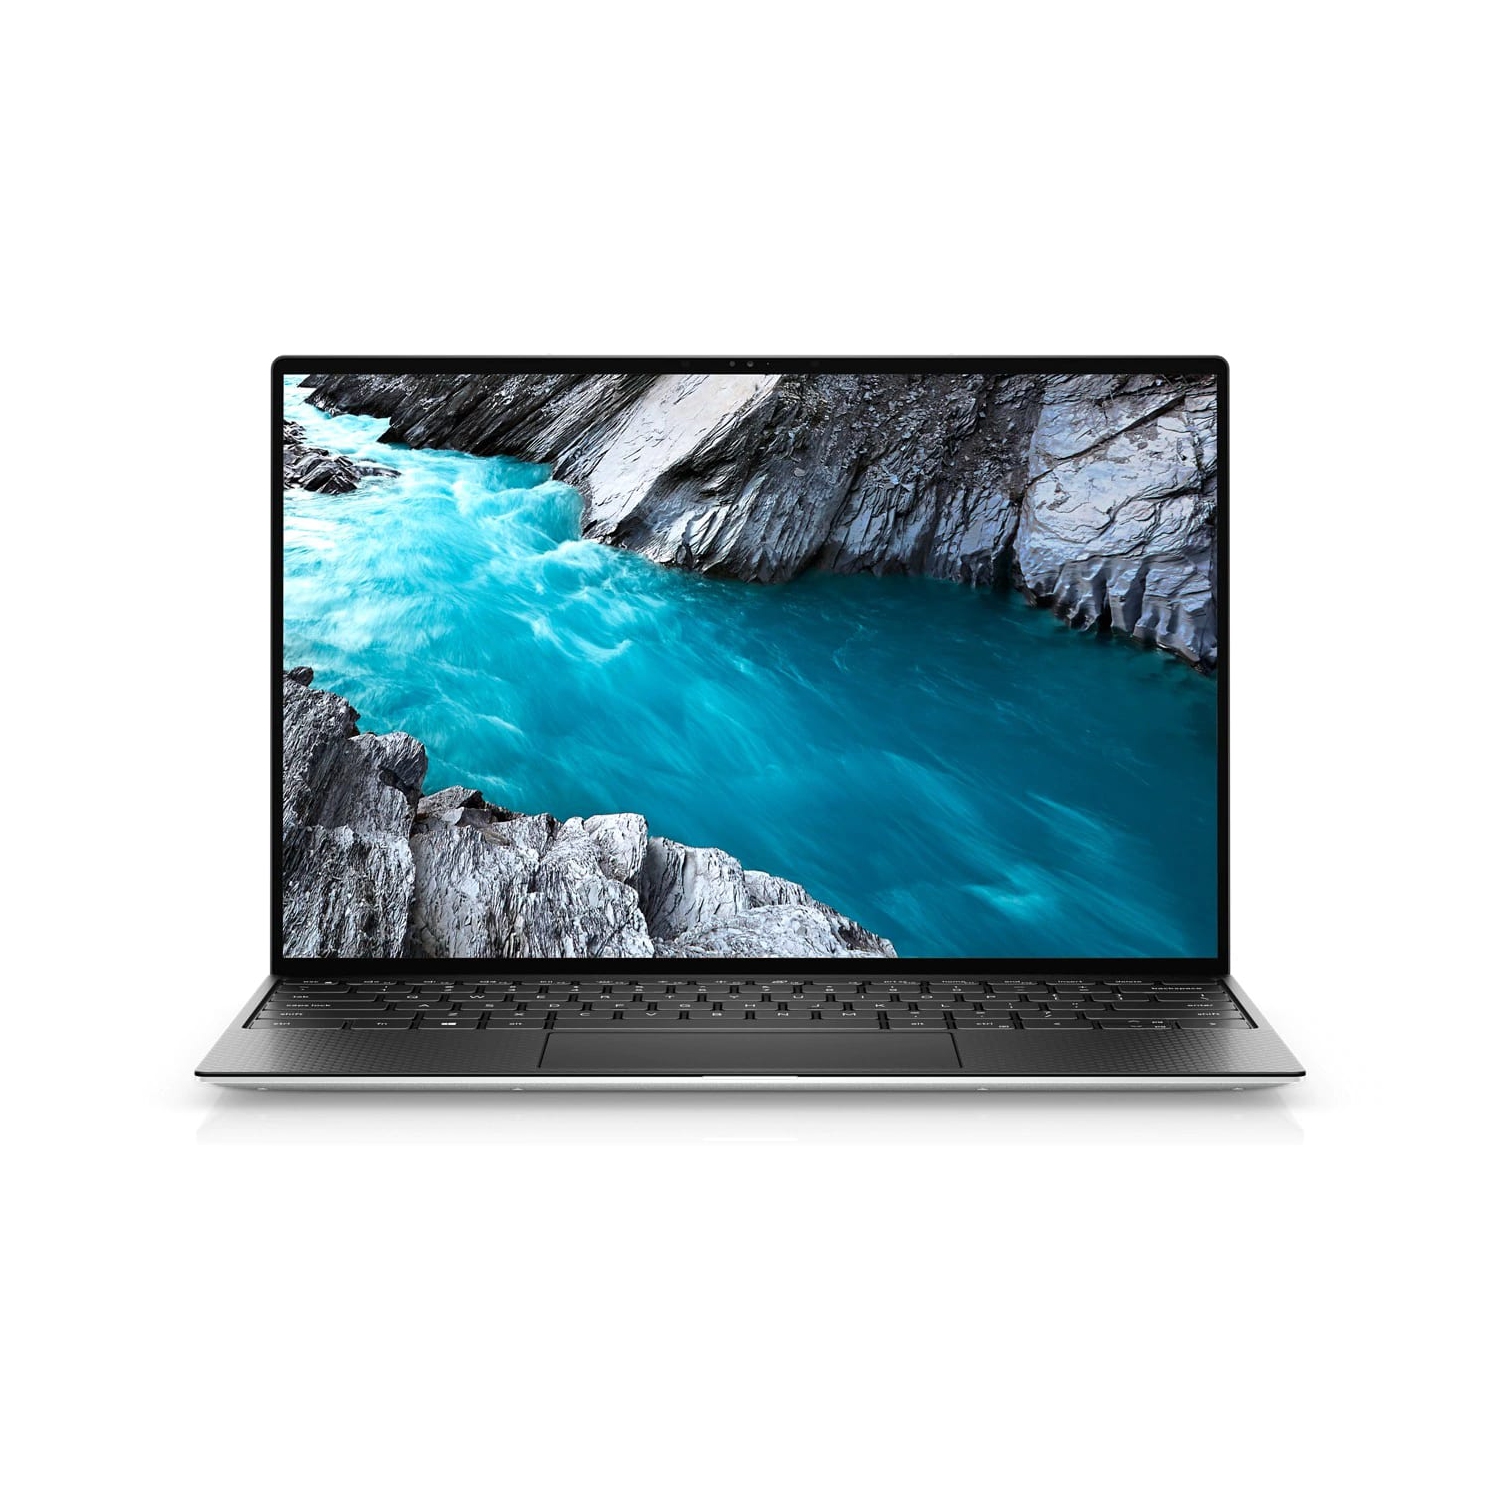 Refurbished (Excellent) - Dell XPS 13 9310 Laptop (2020) | 13.4" FHD+ | Core i5 - 256GB SSD - 8GB RAM | 4 Cores @ 4.2 GHz - 11th Gen CPU Certified Refurbished